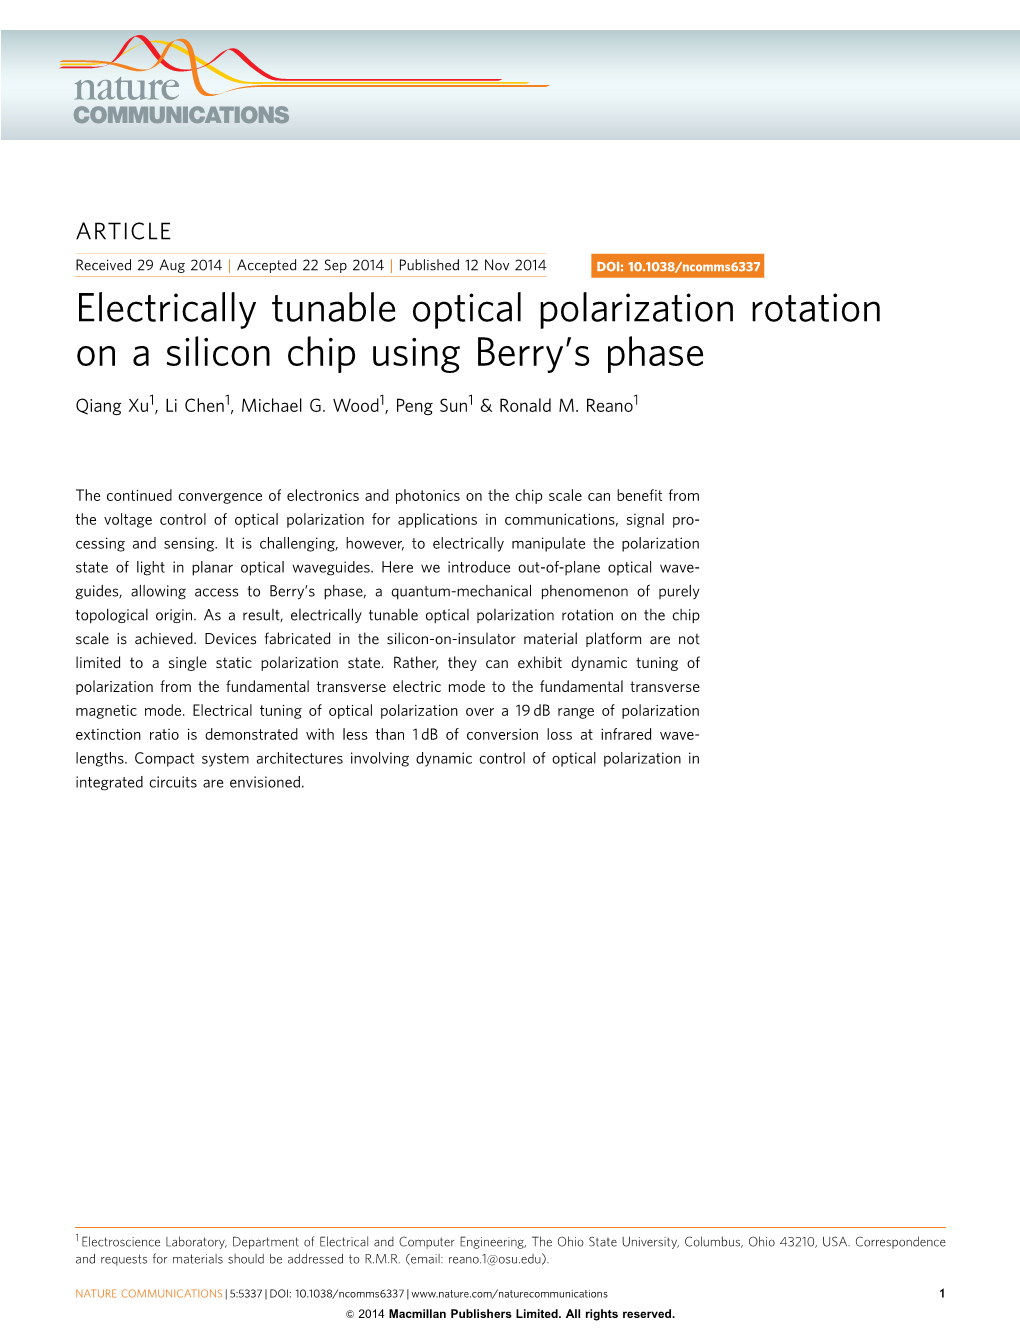 Electrically Tunable Optical Polarization Rotation on a Silicon Chip Using Berry’S Phase